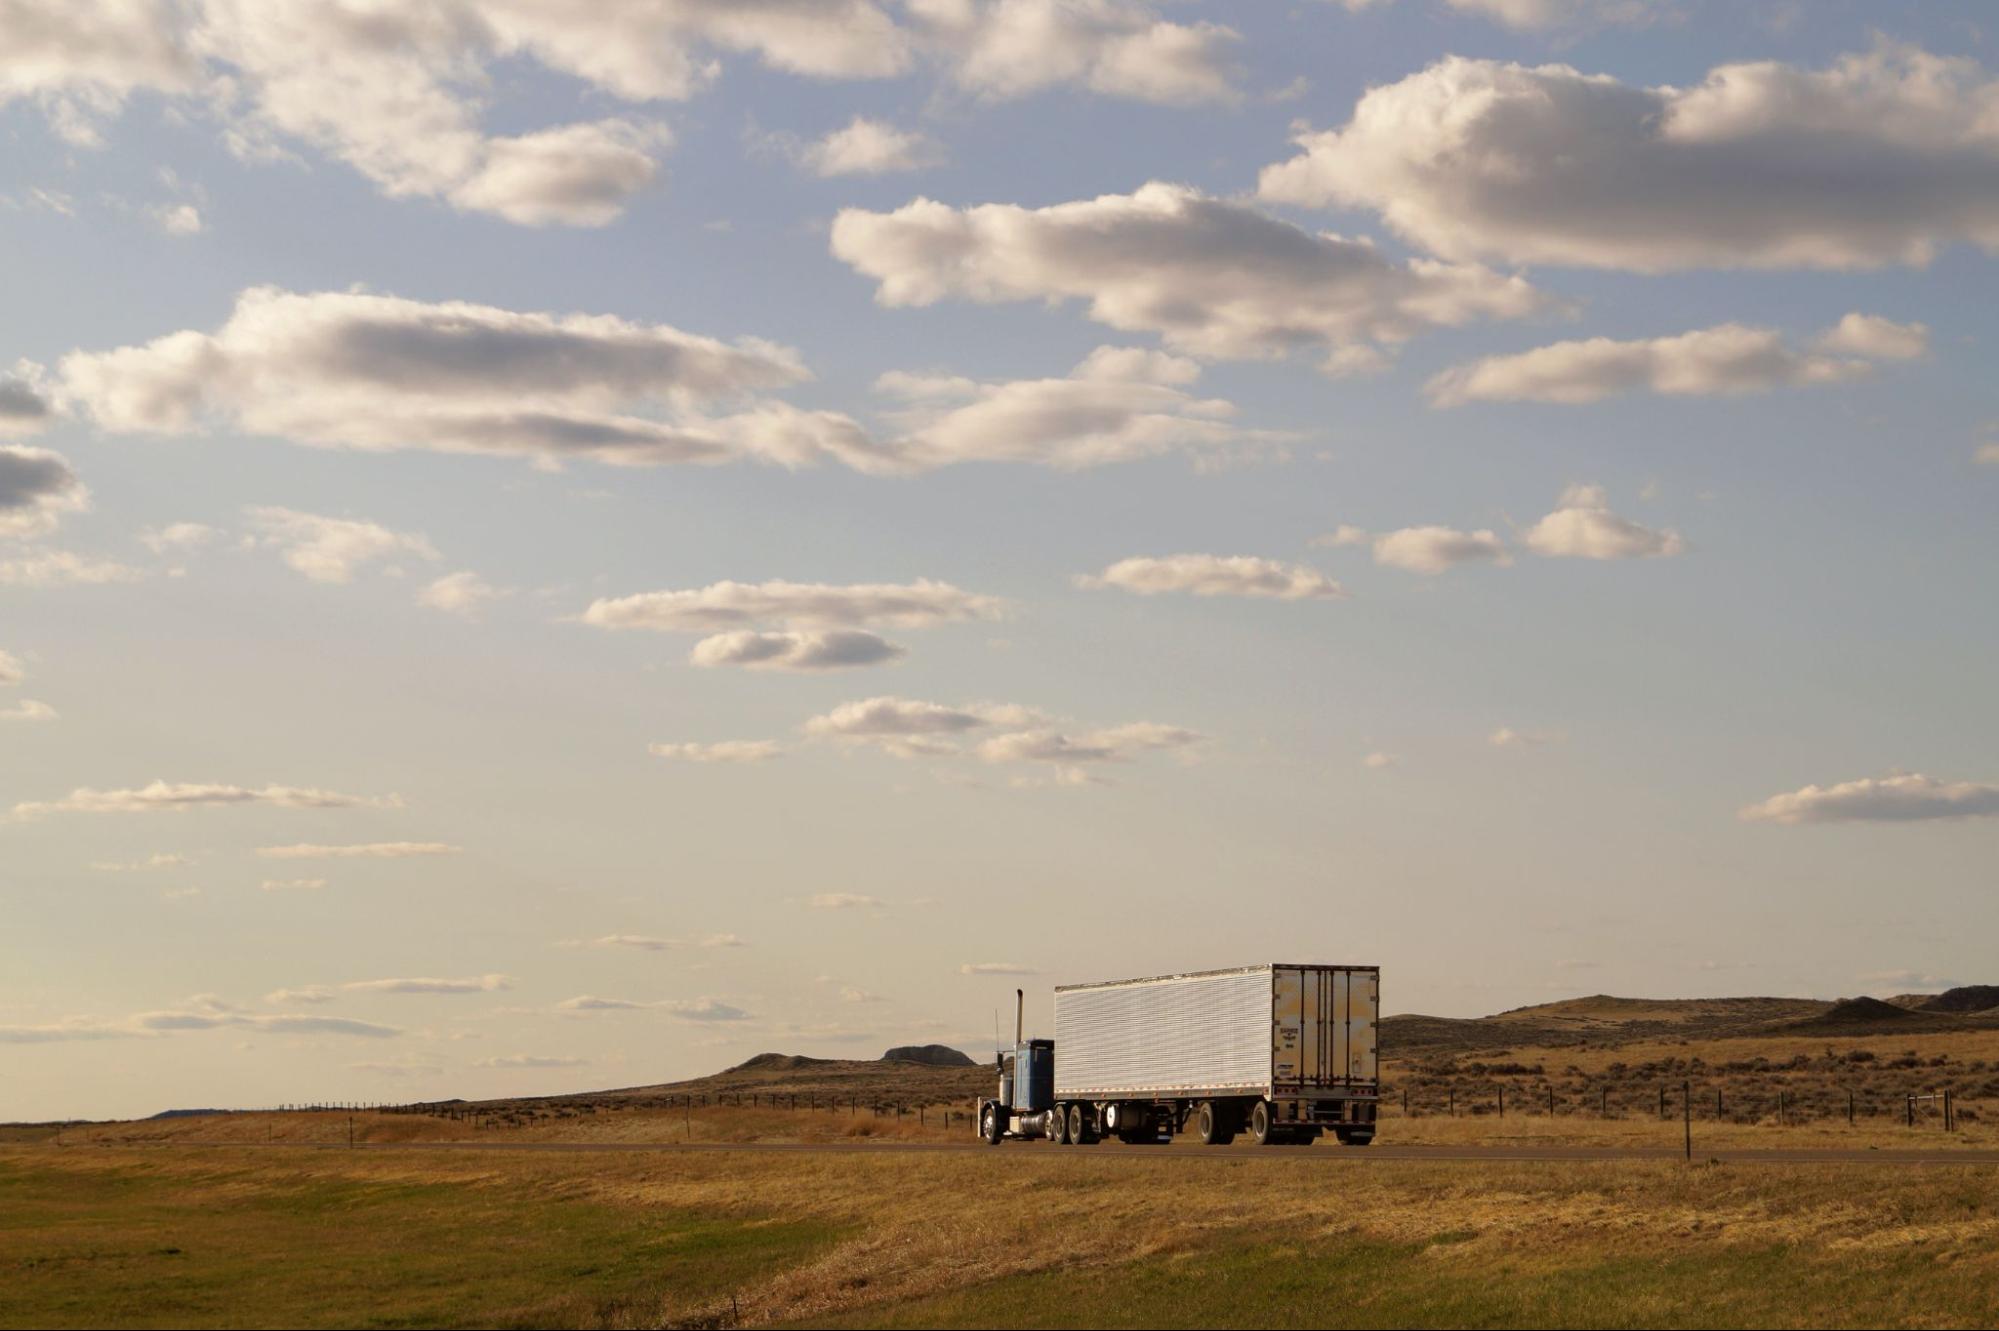 A semi truck driving along a road surrounded by open fields and clear sky.